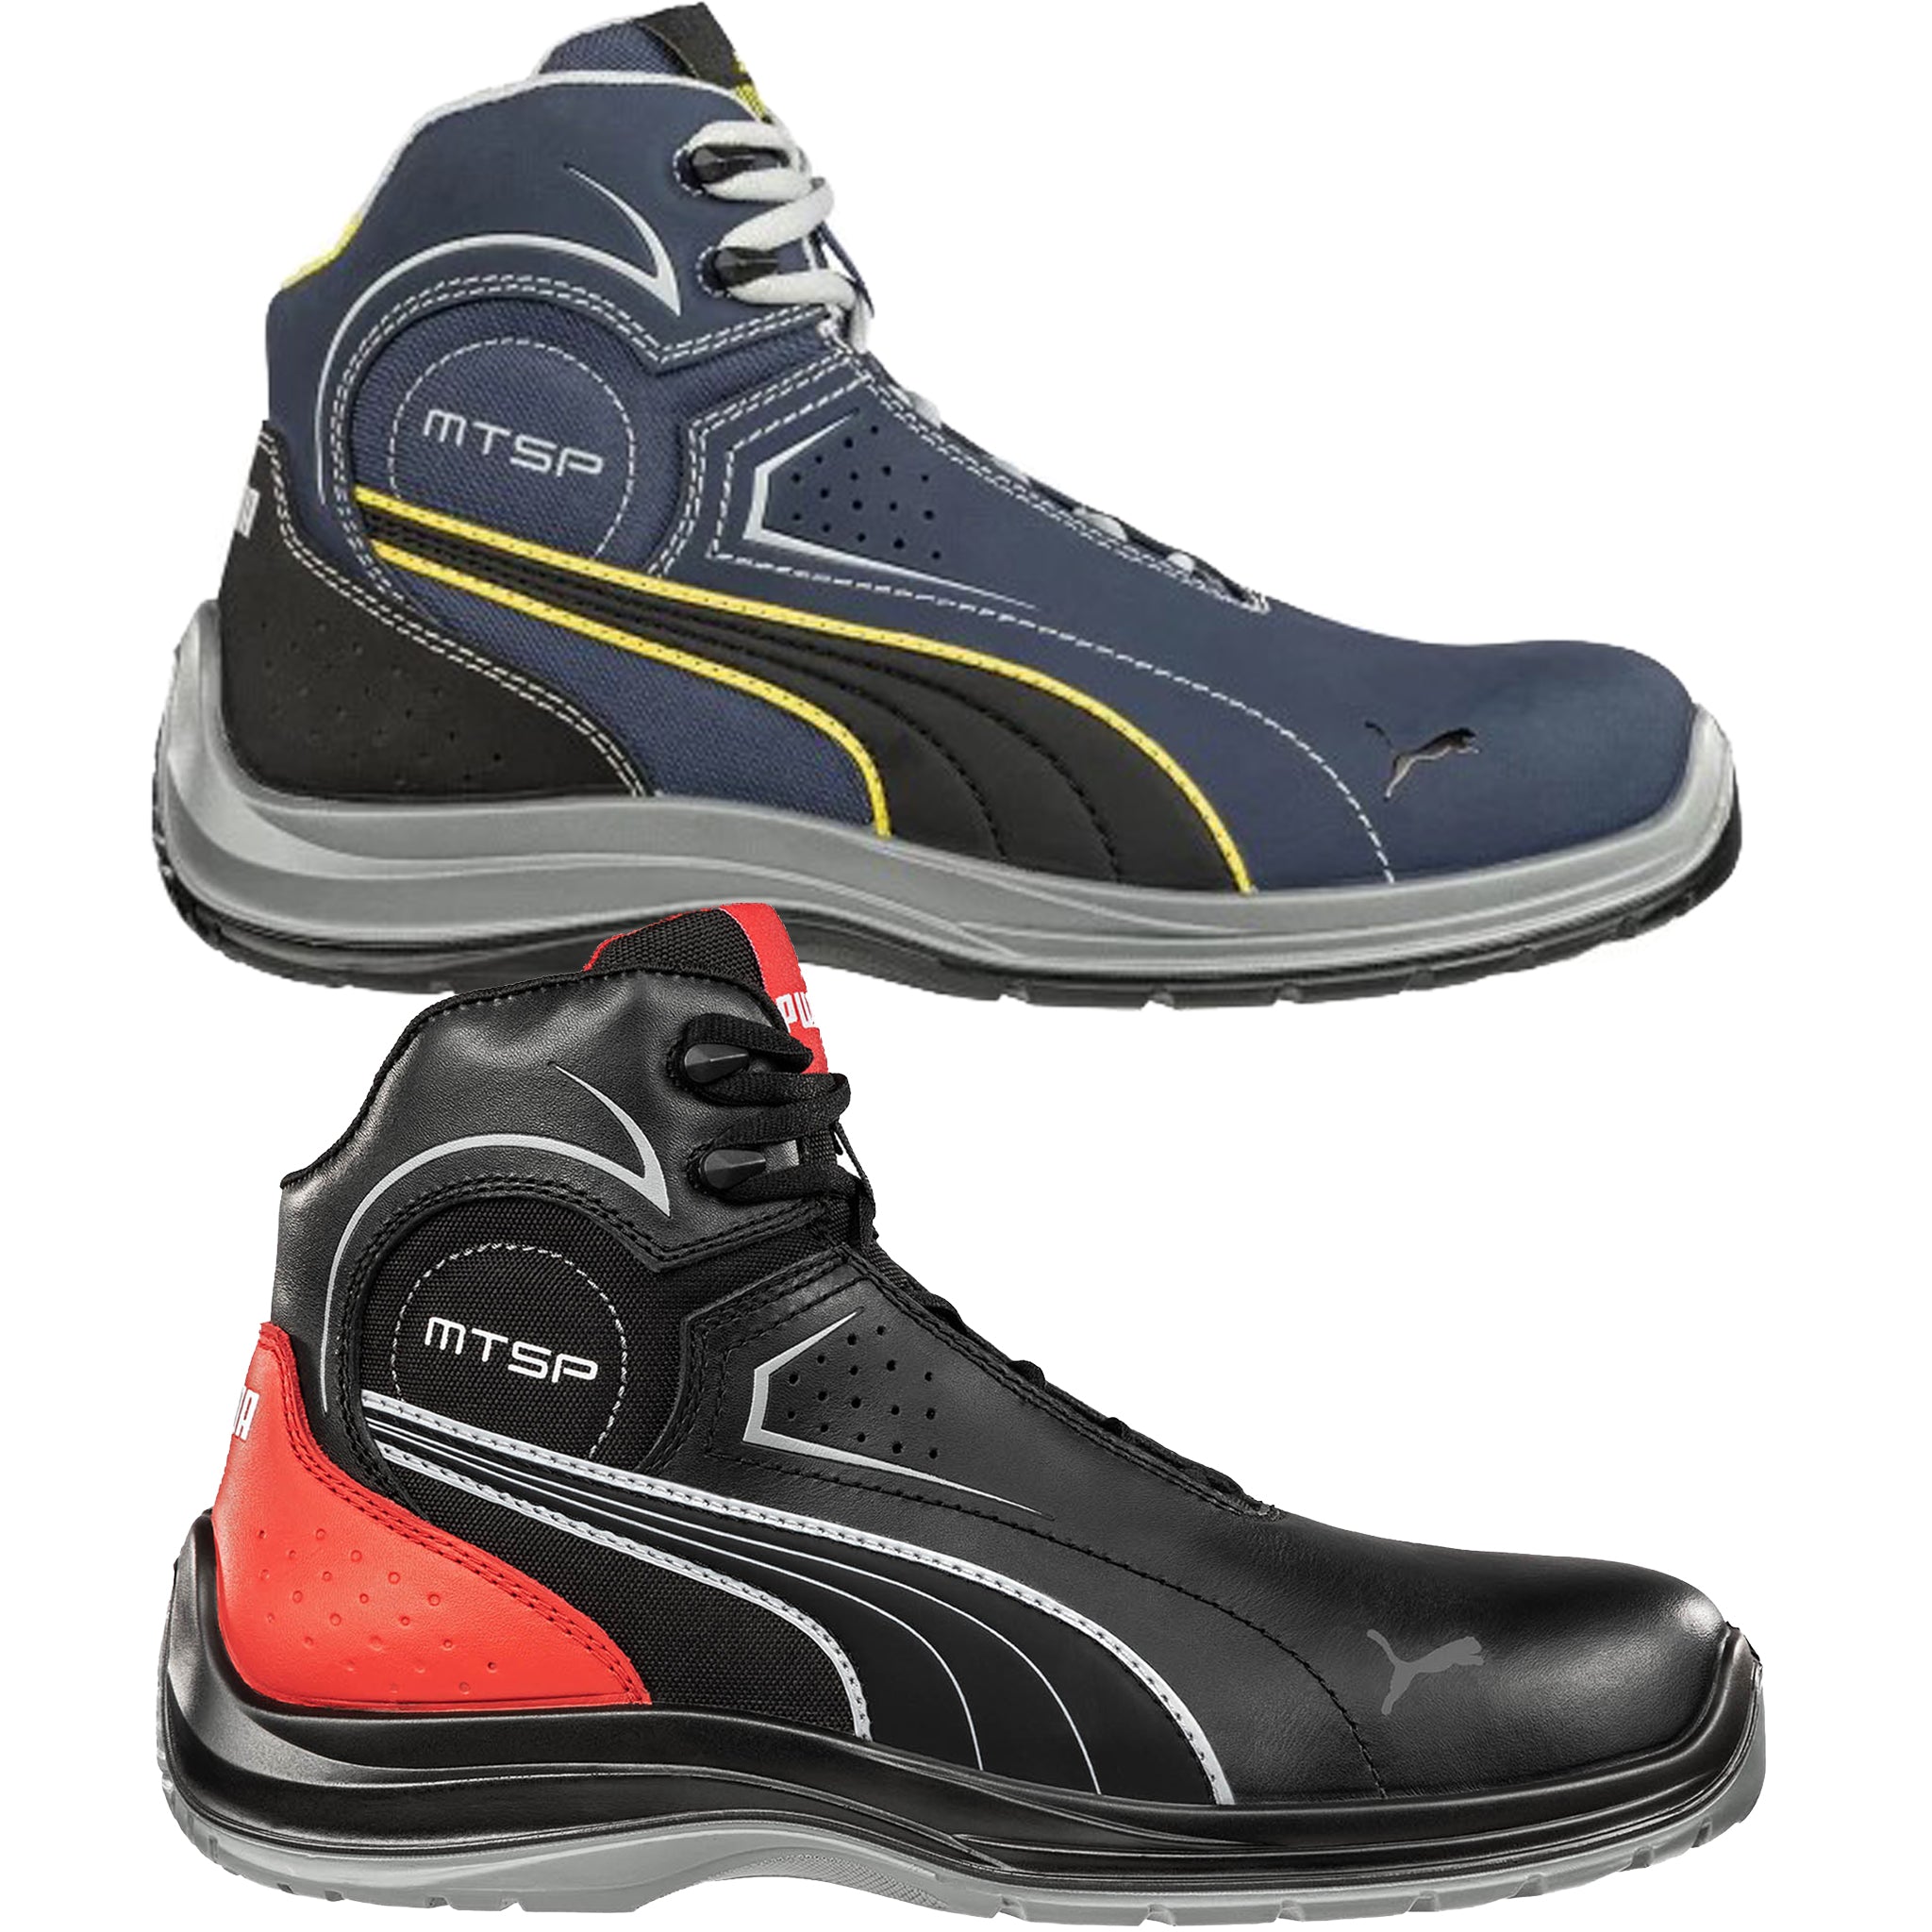 Puma Men's Touring Mid ASTM EH Toe Work Shoes – That Shoe Store and More